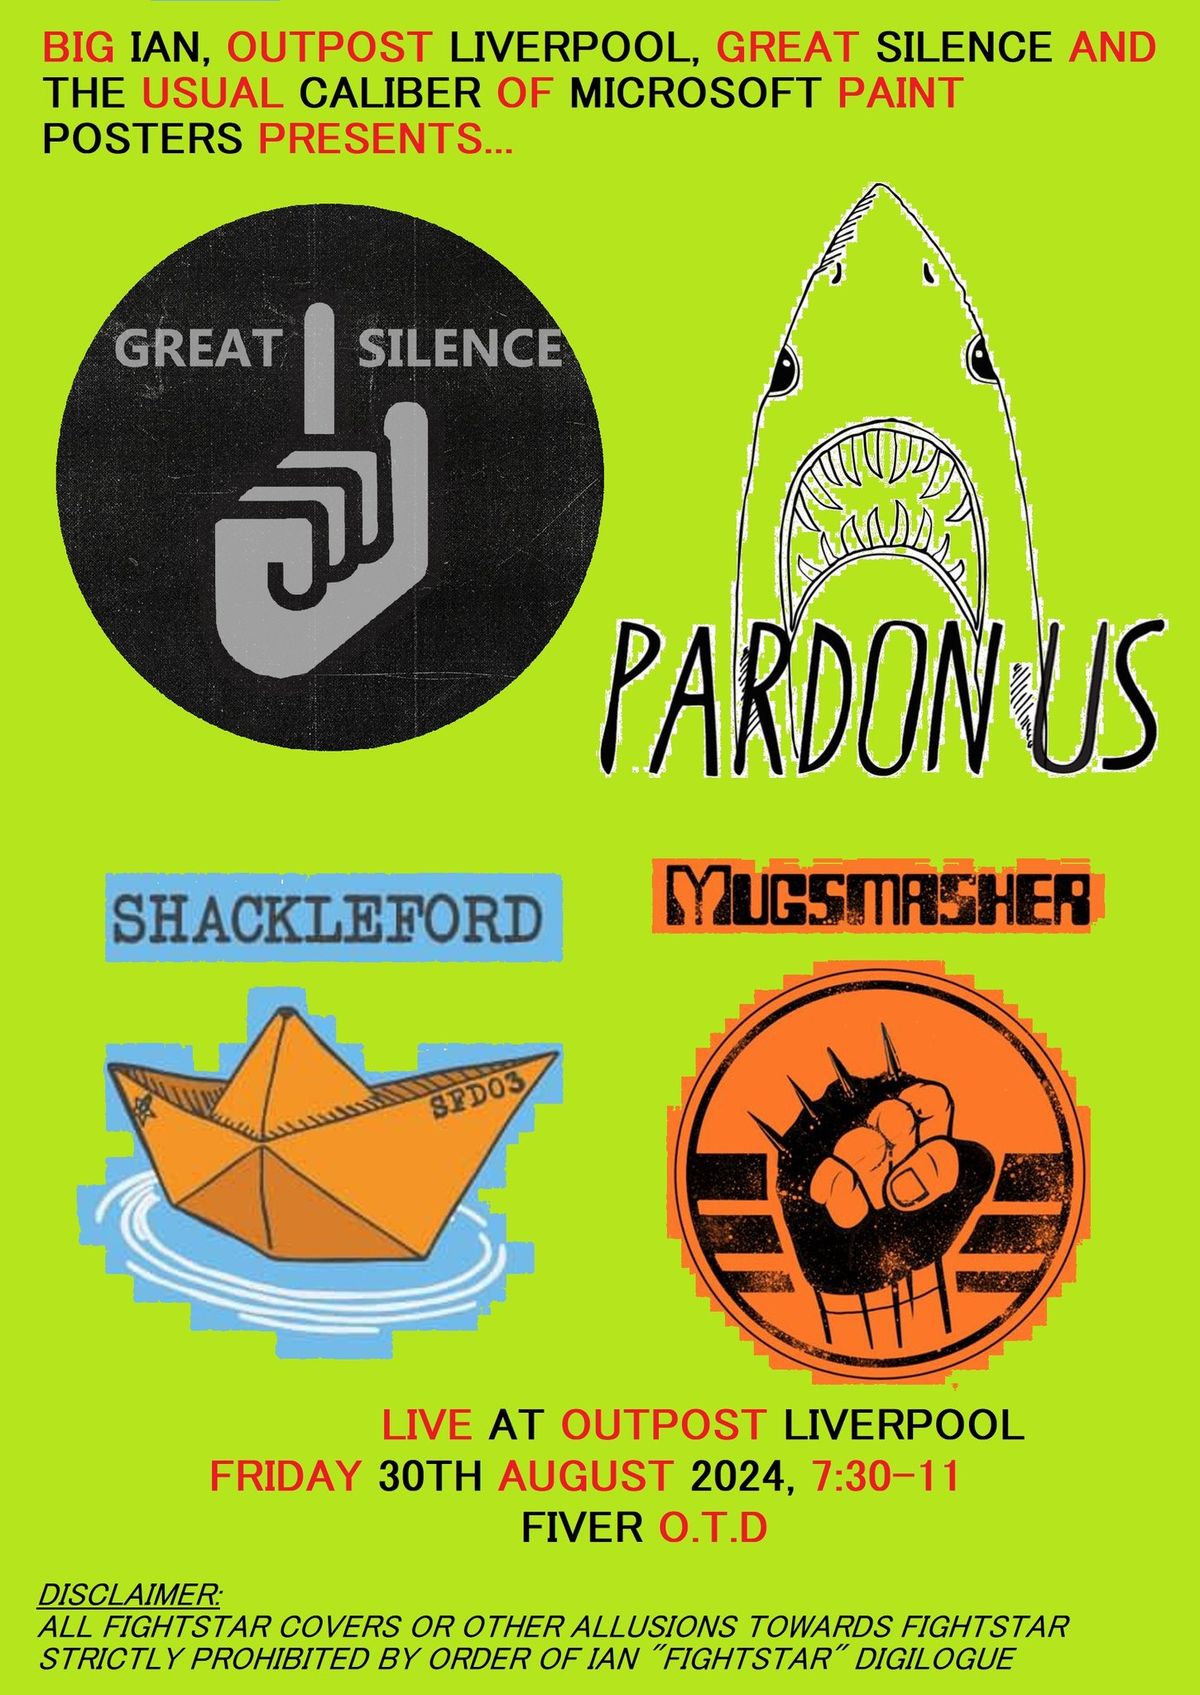 Great Silence, Pardon Us, Shackleford and Mugsmasher live at Outpost